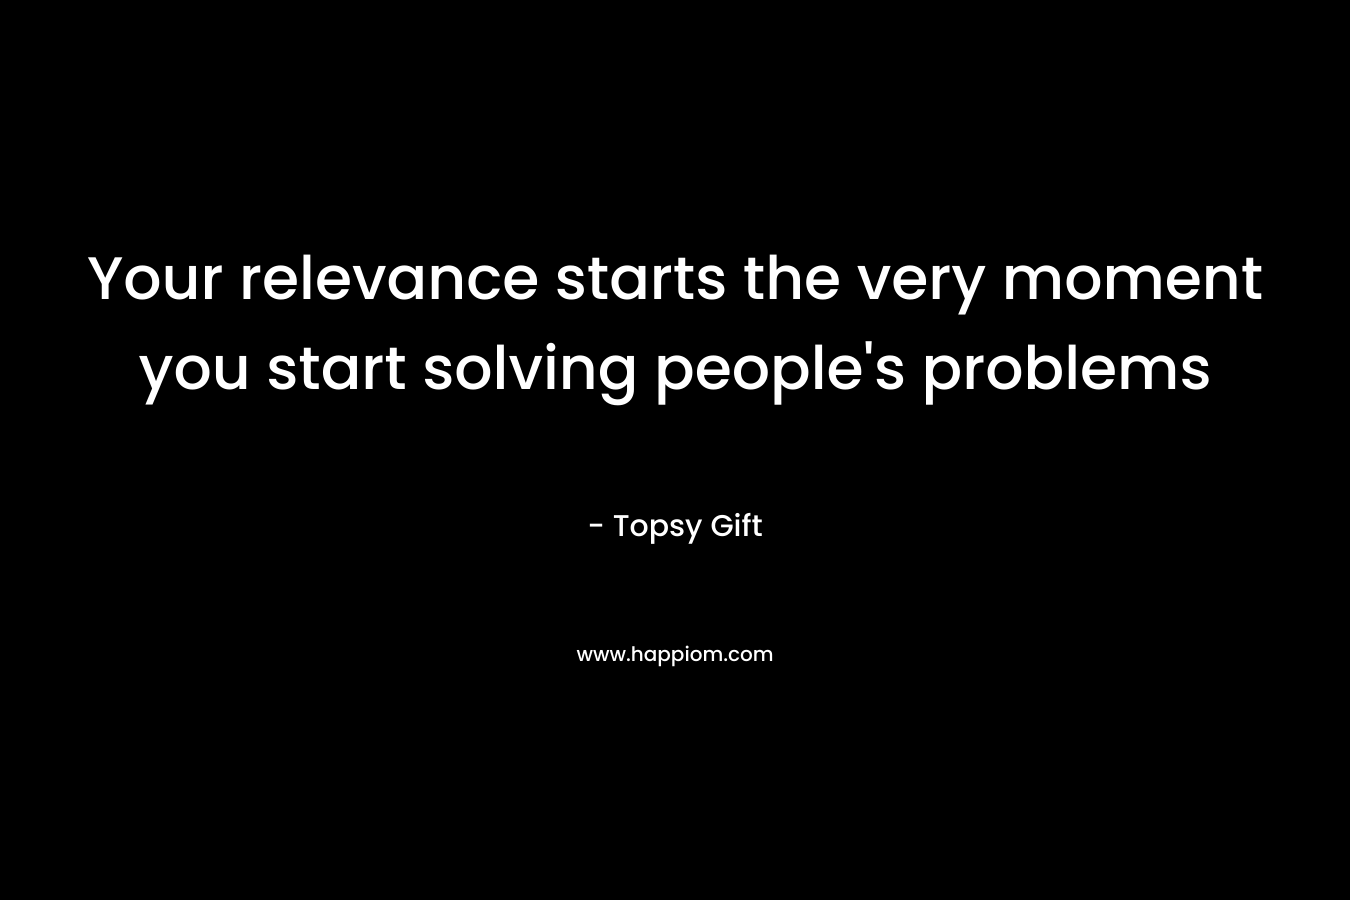 Your relevance starts the very moment you start solving people’s problems – Topsy Gift